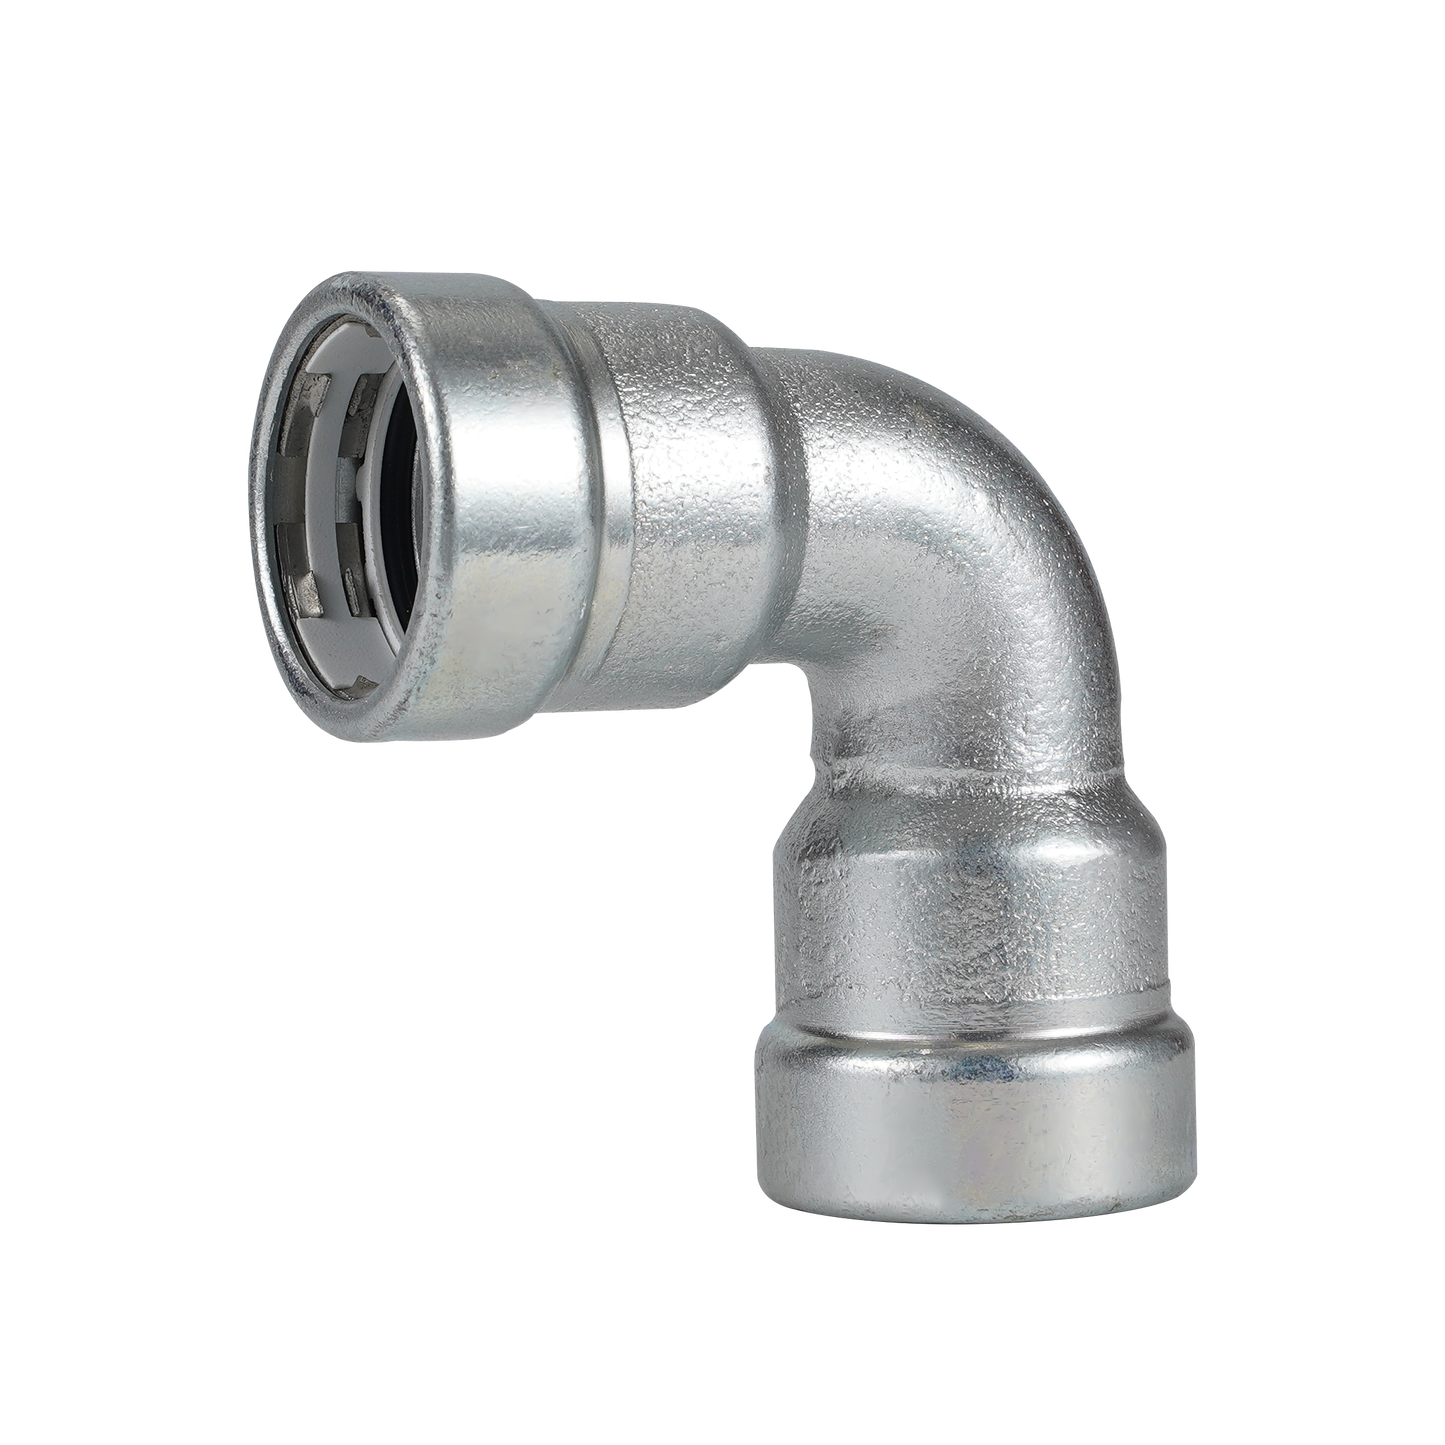 LC-Press Carbon steel Press fittings for thick-wall steel pipe, 90° Elbow, 1x1 inch PxP